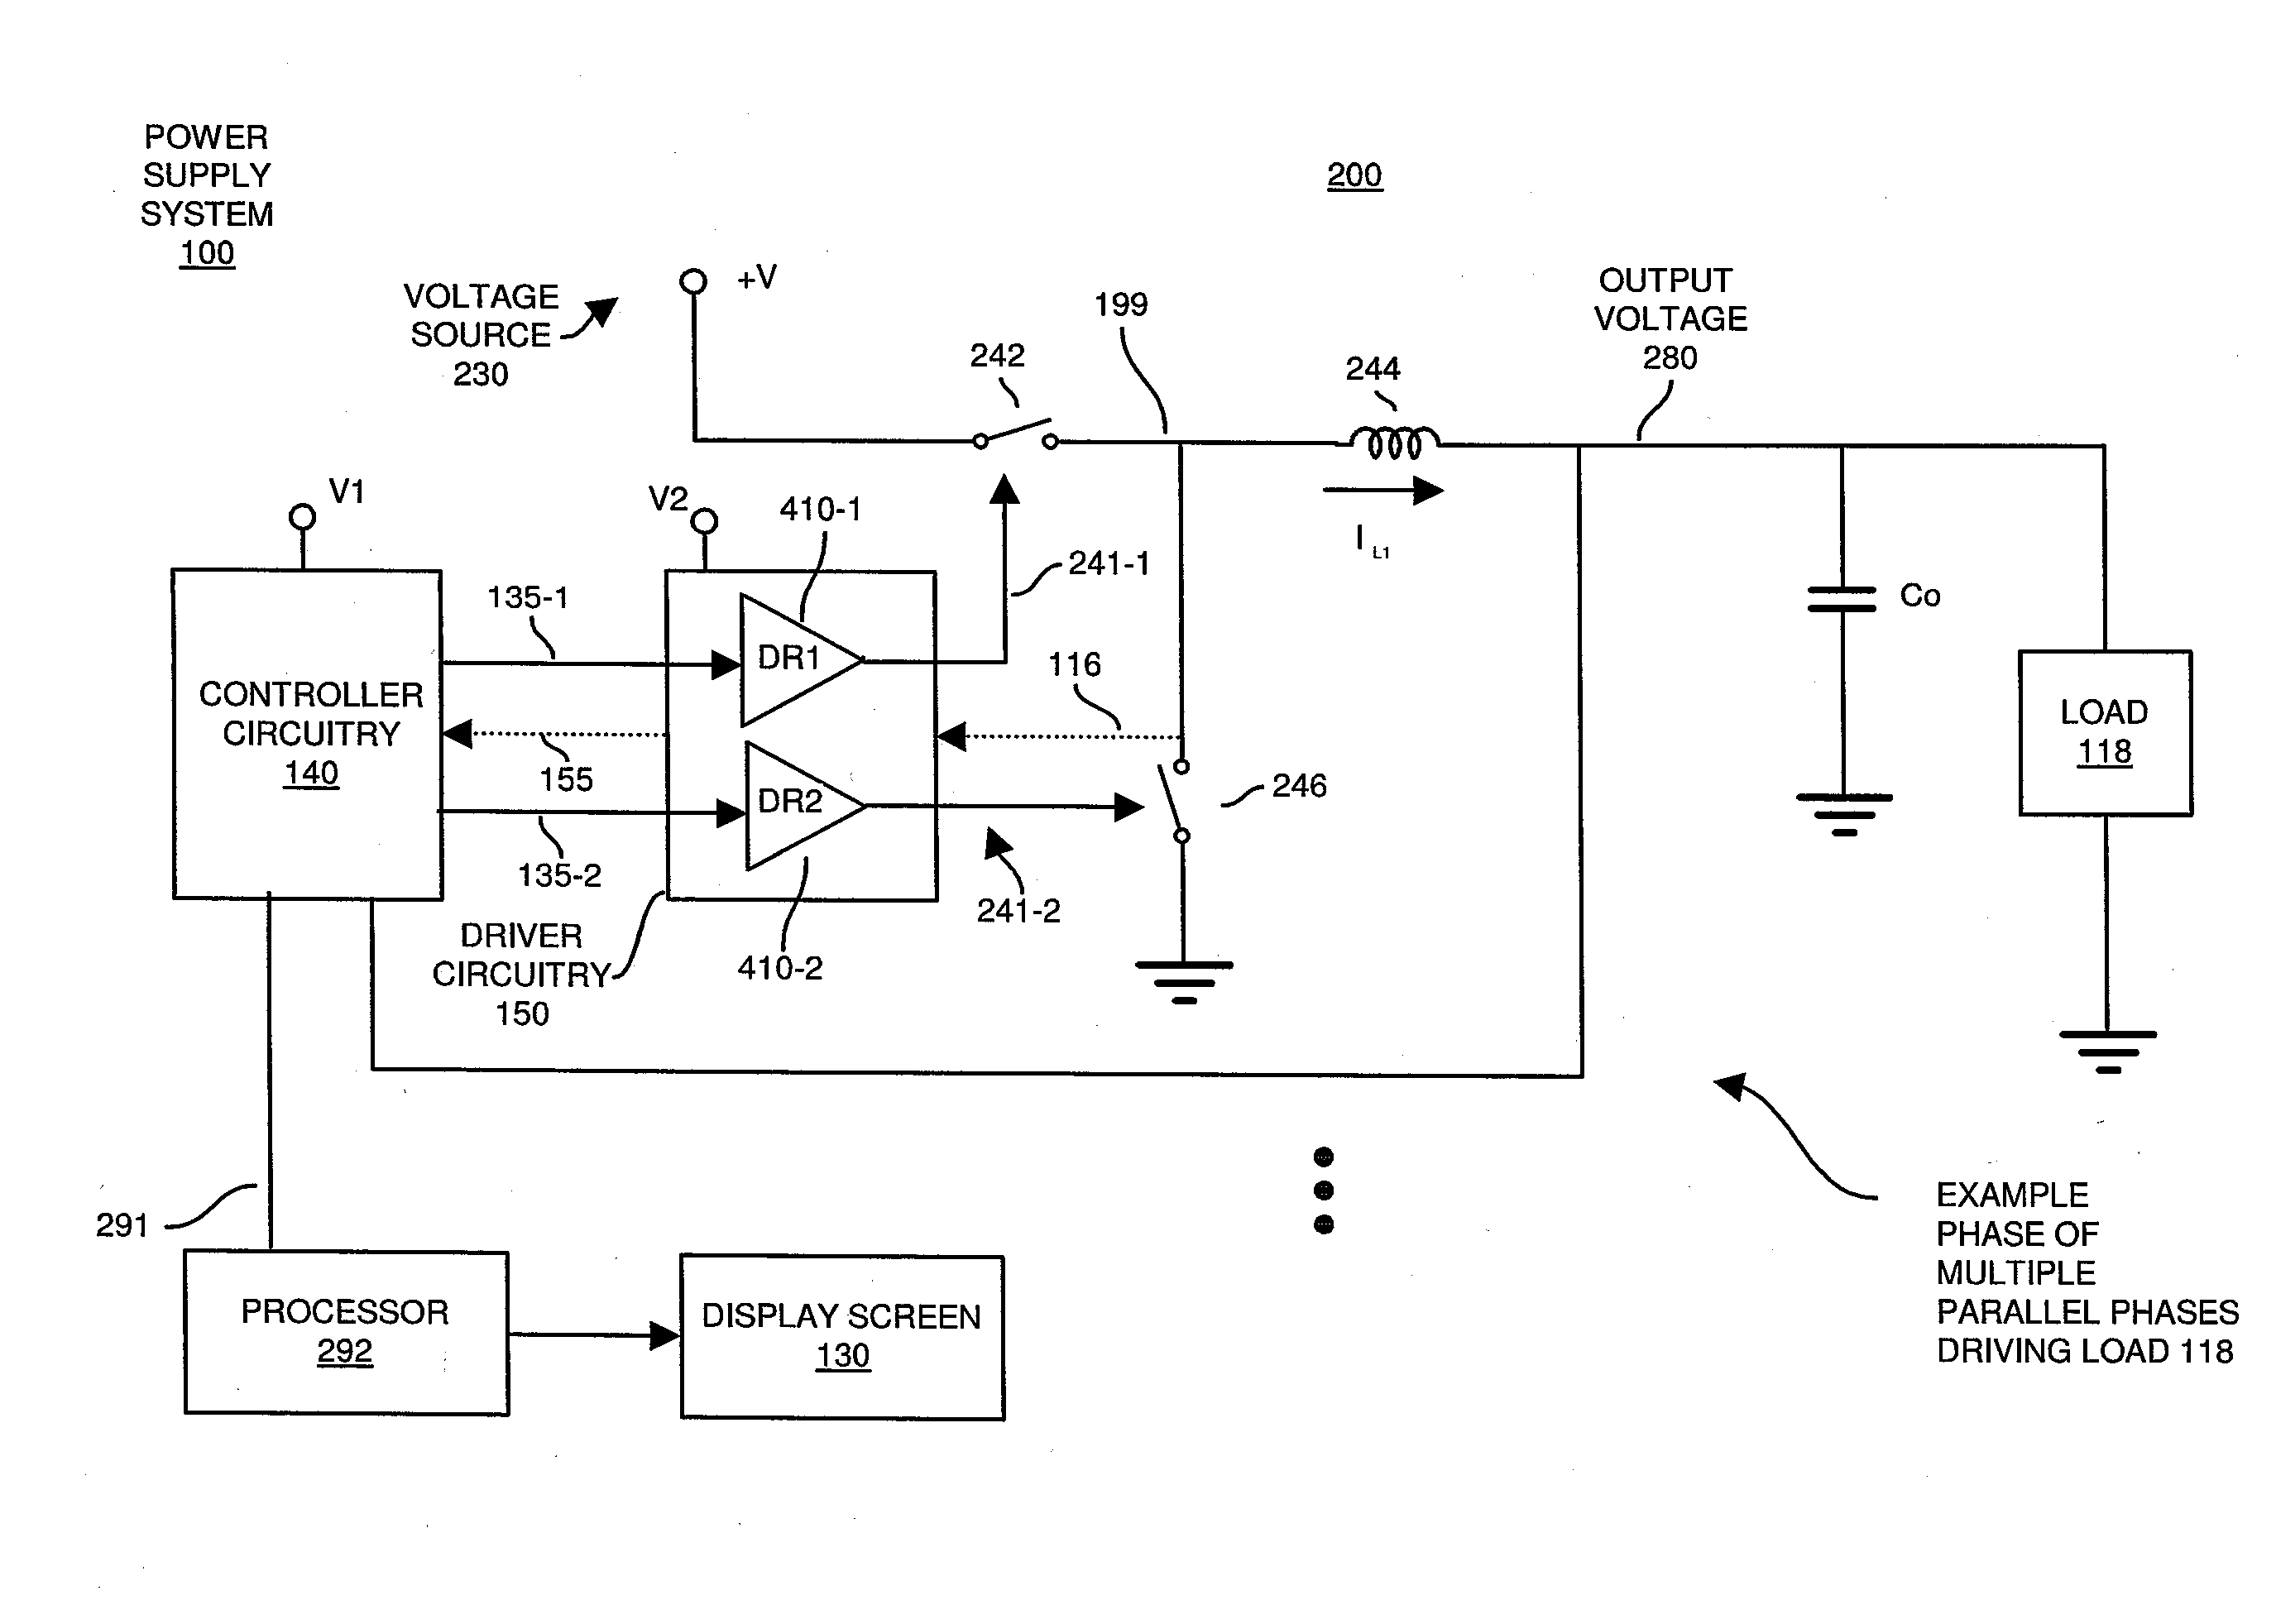 Circuit connectivity and conveyance of power status information